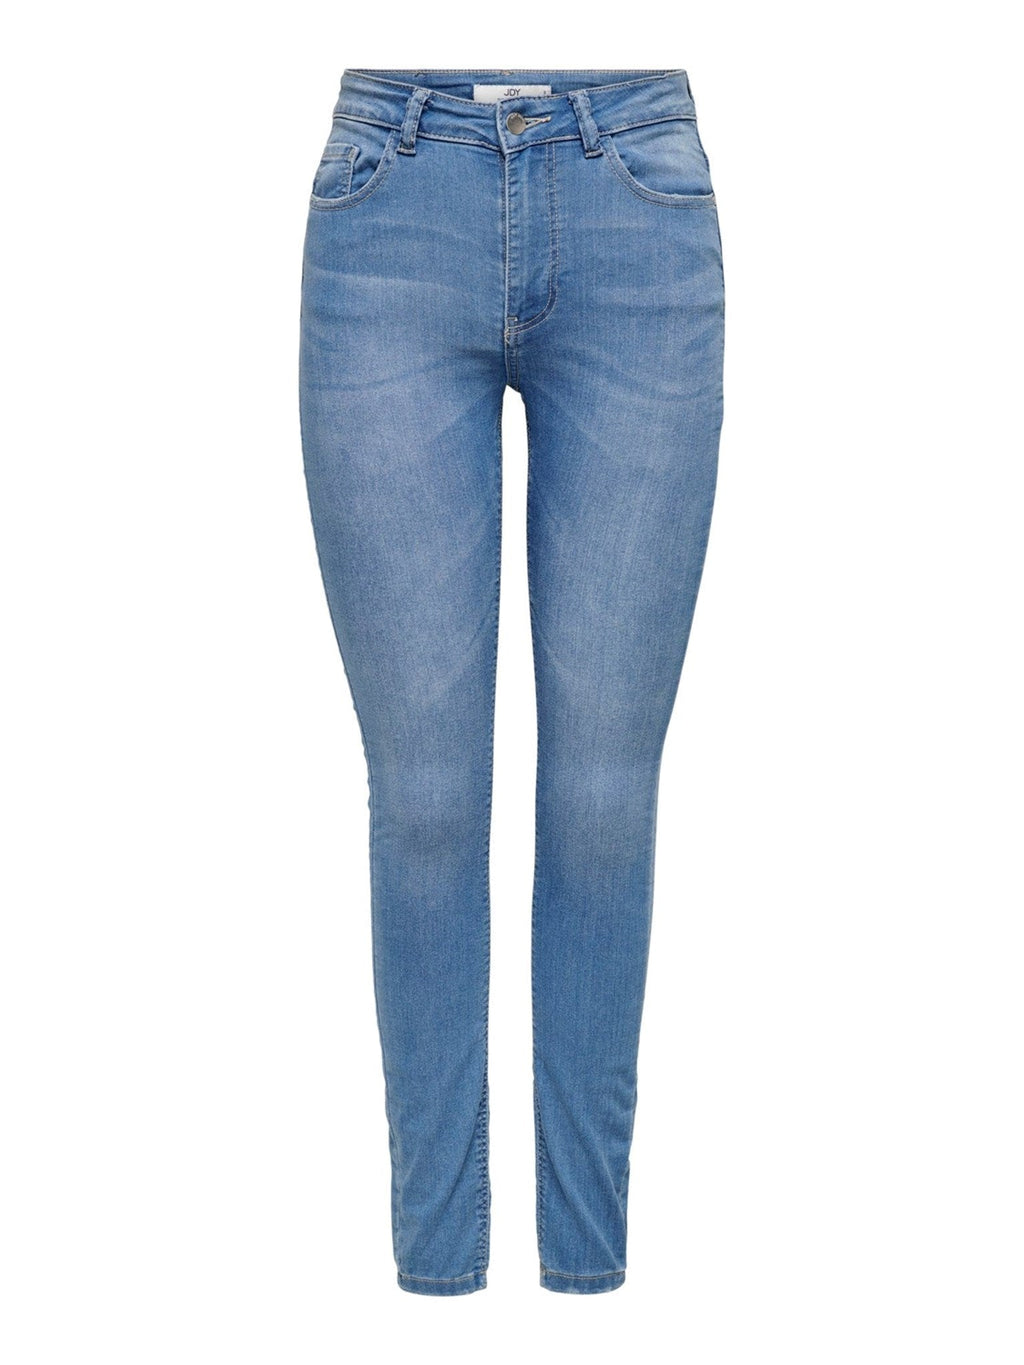 Performance Jeans - Light Blue (Mid Taille)